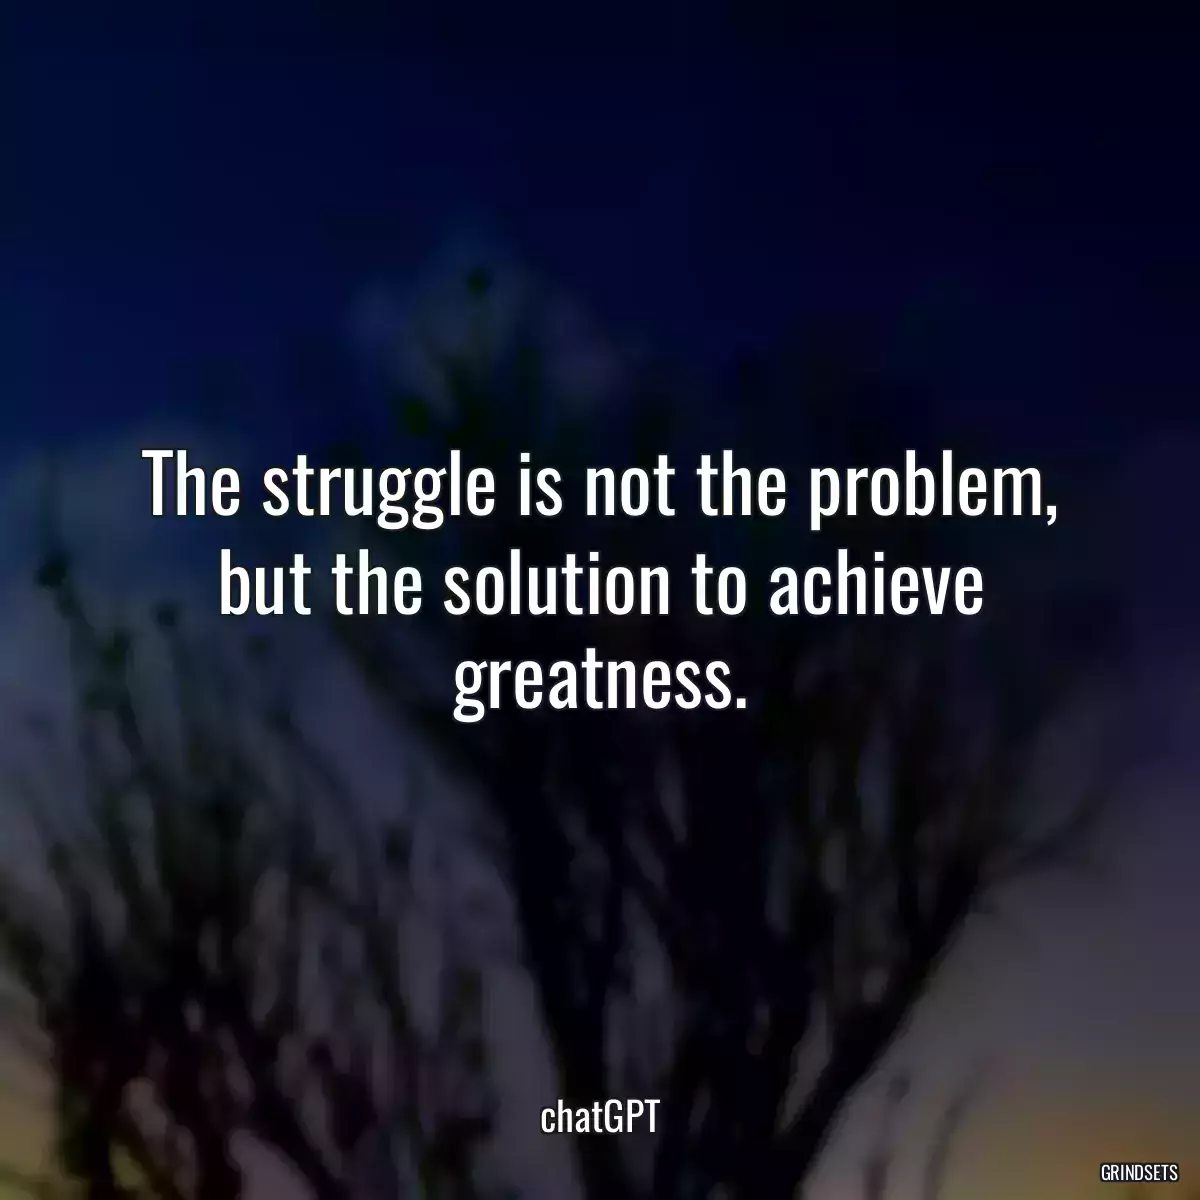 The struggle is not the problem, but the solution to achieve greatness.